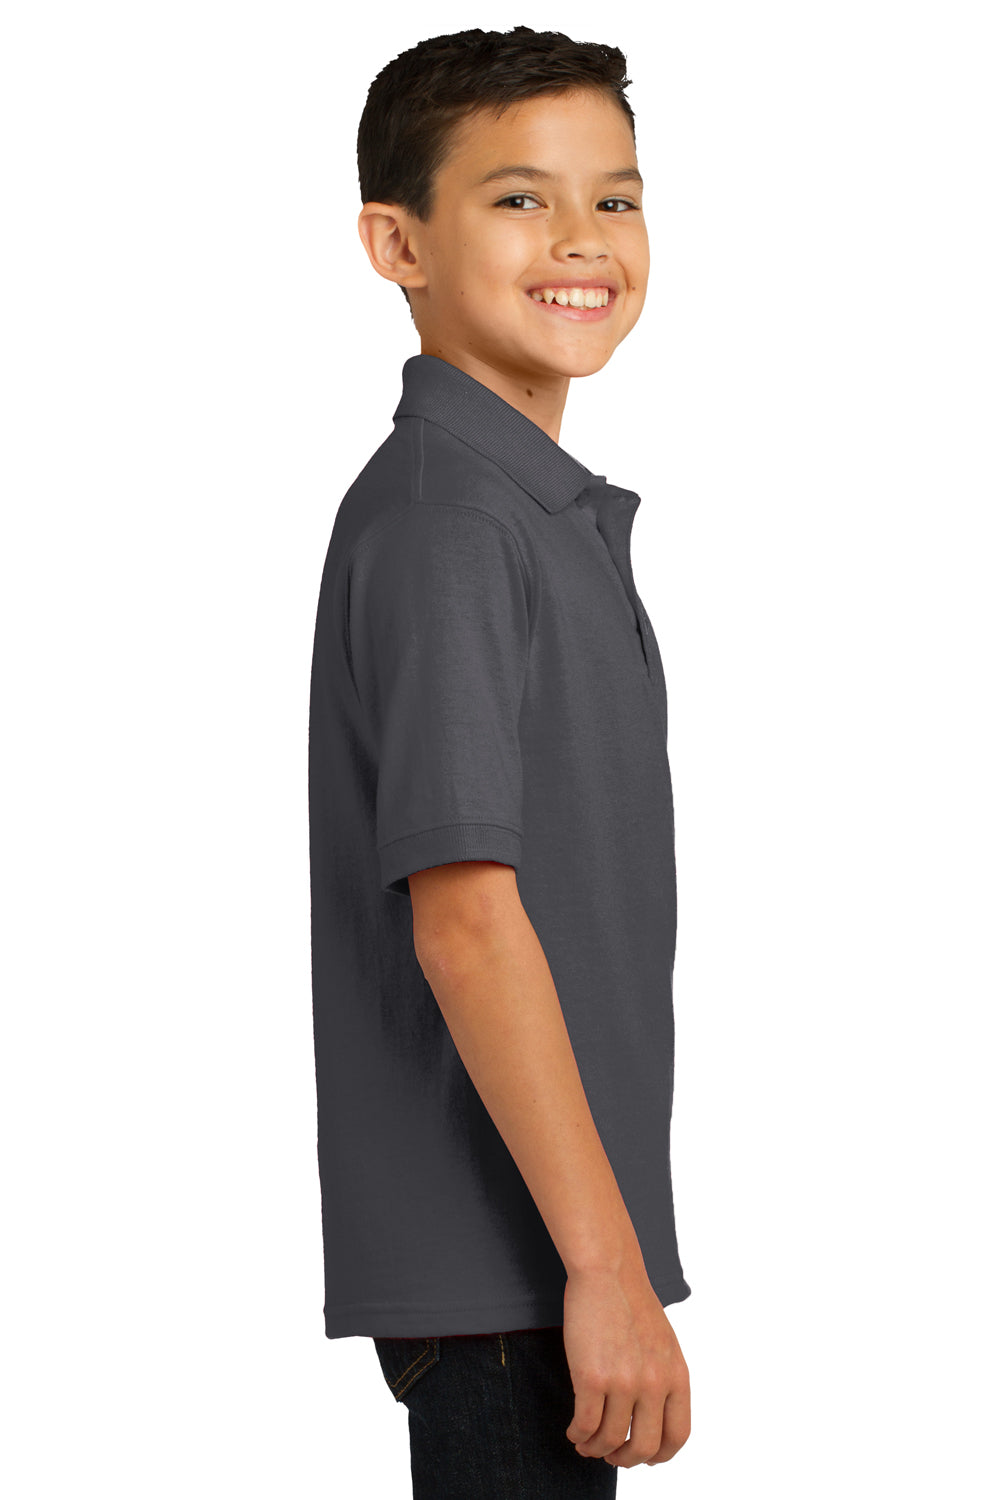 Port & Company KP55Y Youth Core Stain Resistant Short Sleeve Polo Shirt Charcoal Grey Side